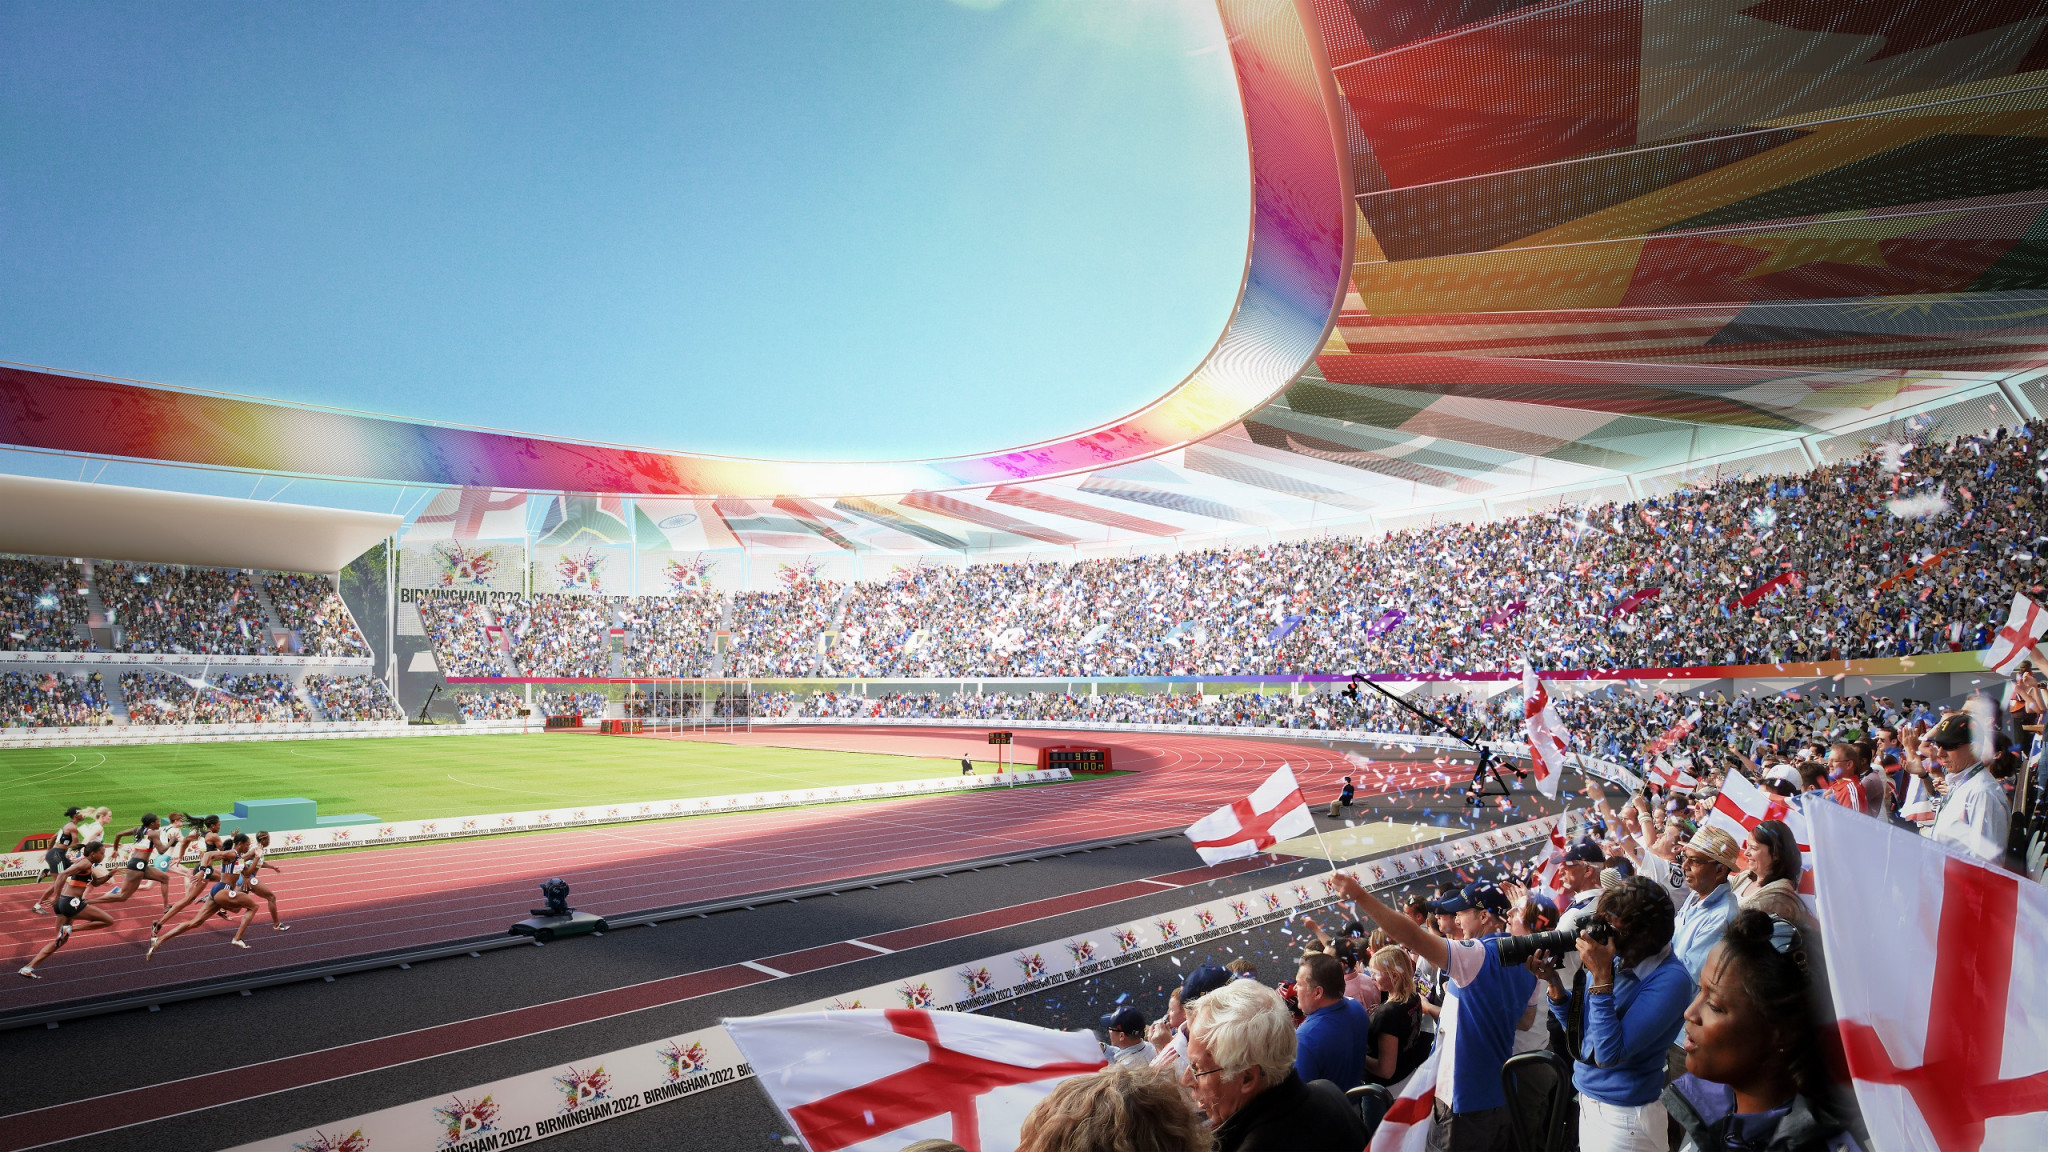 Mace set to project manage Alexander Stadium revamp for Birmingham 2022 Commonwealth Games